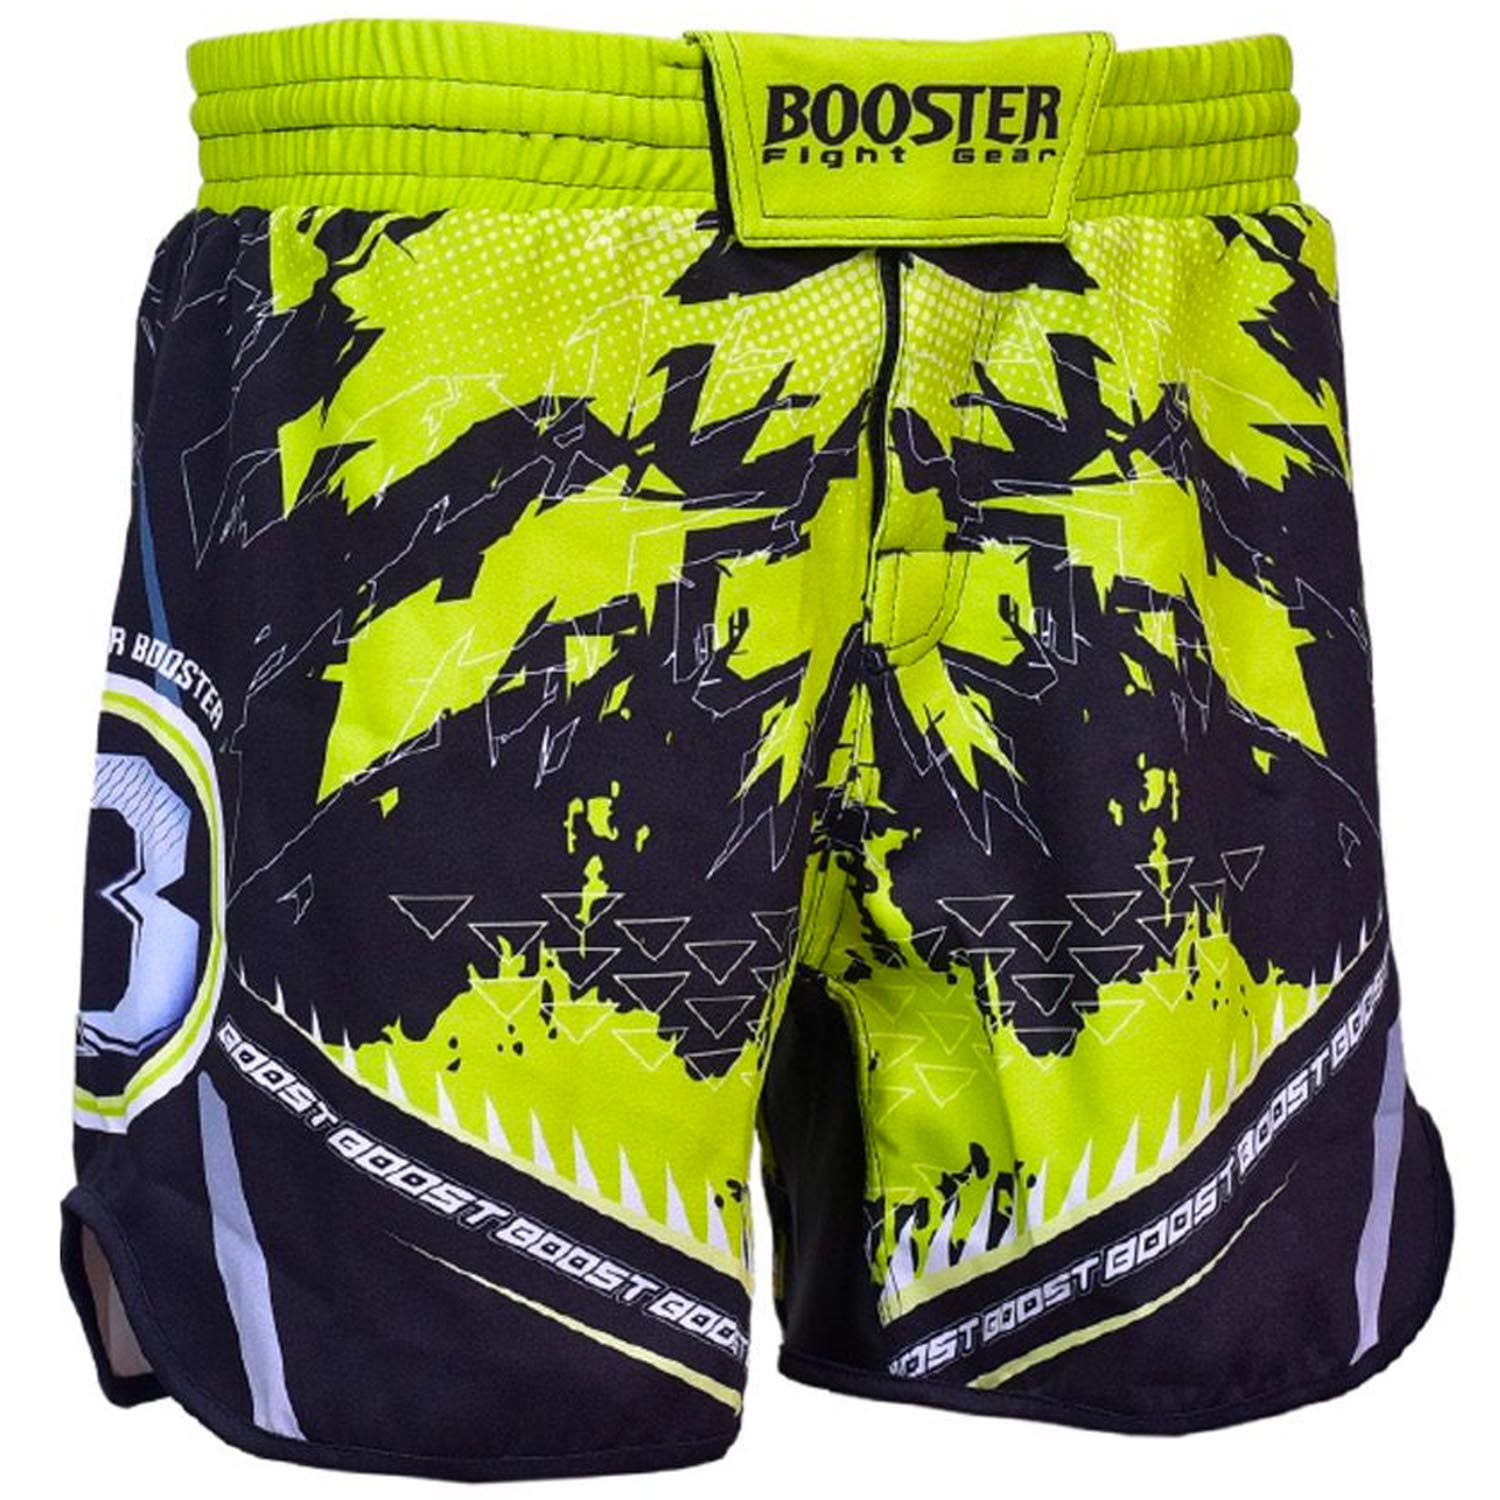 Booster MMA Fight Shorts, Chaos 2, black-yellow